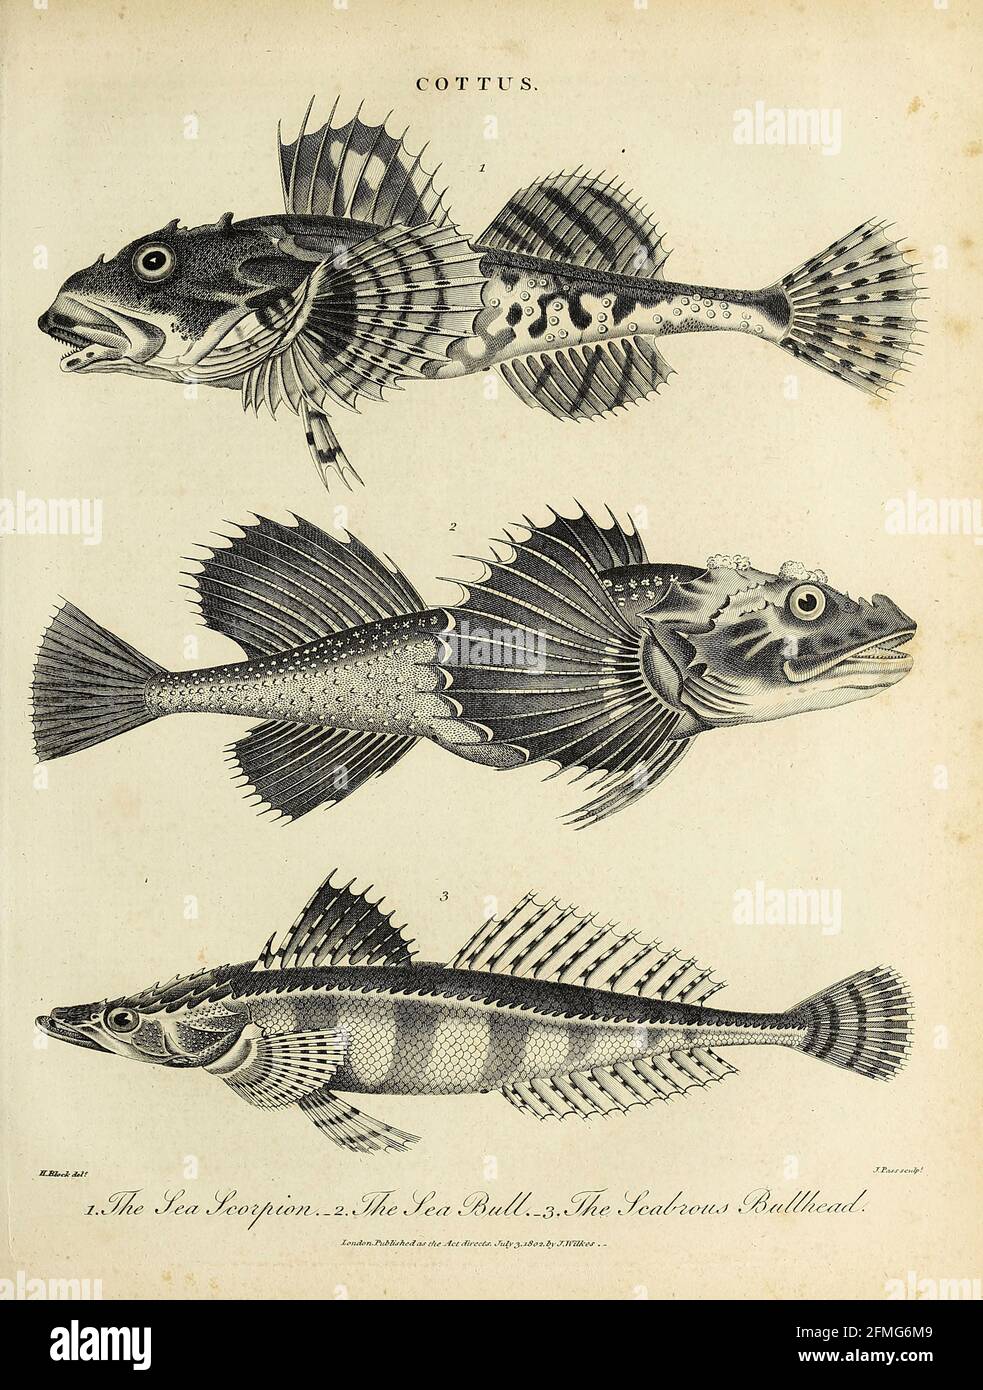 Cottus 1. Sea Scorpion 2. Sea Bull 3. Scabrous Bullhead Copperplate engraving From the Encyclopaedia Londinensis or, Universal dictionary of arts, sciences, and literature; Volume V;  Edited by Wilkes, John. Published in London in 1810 Stock Photo